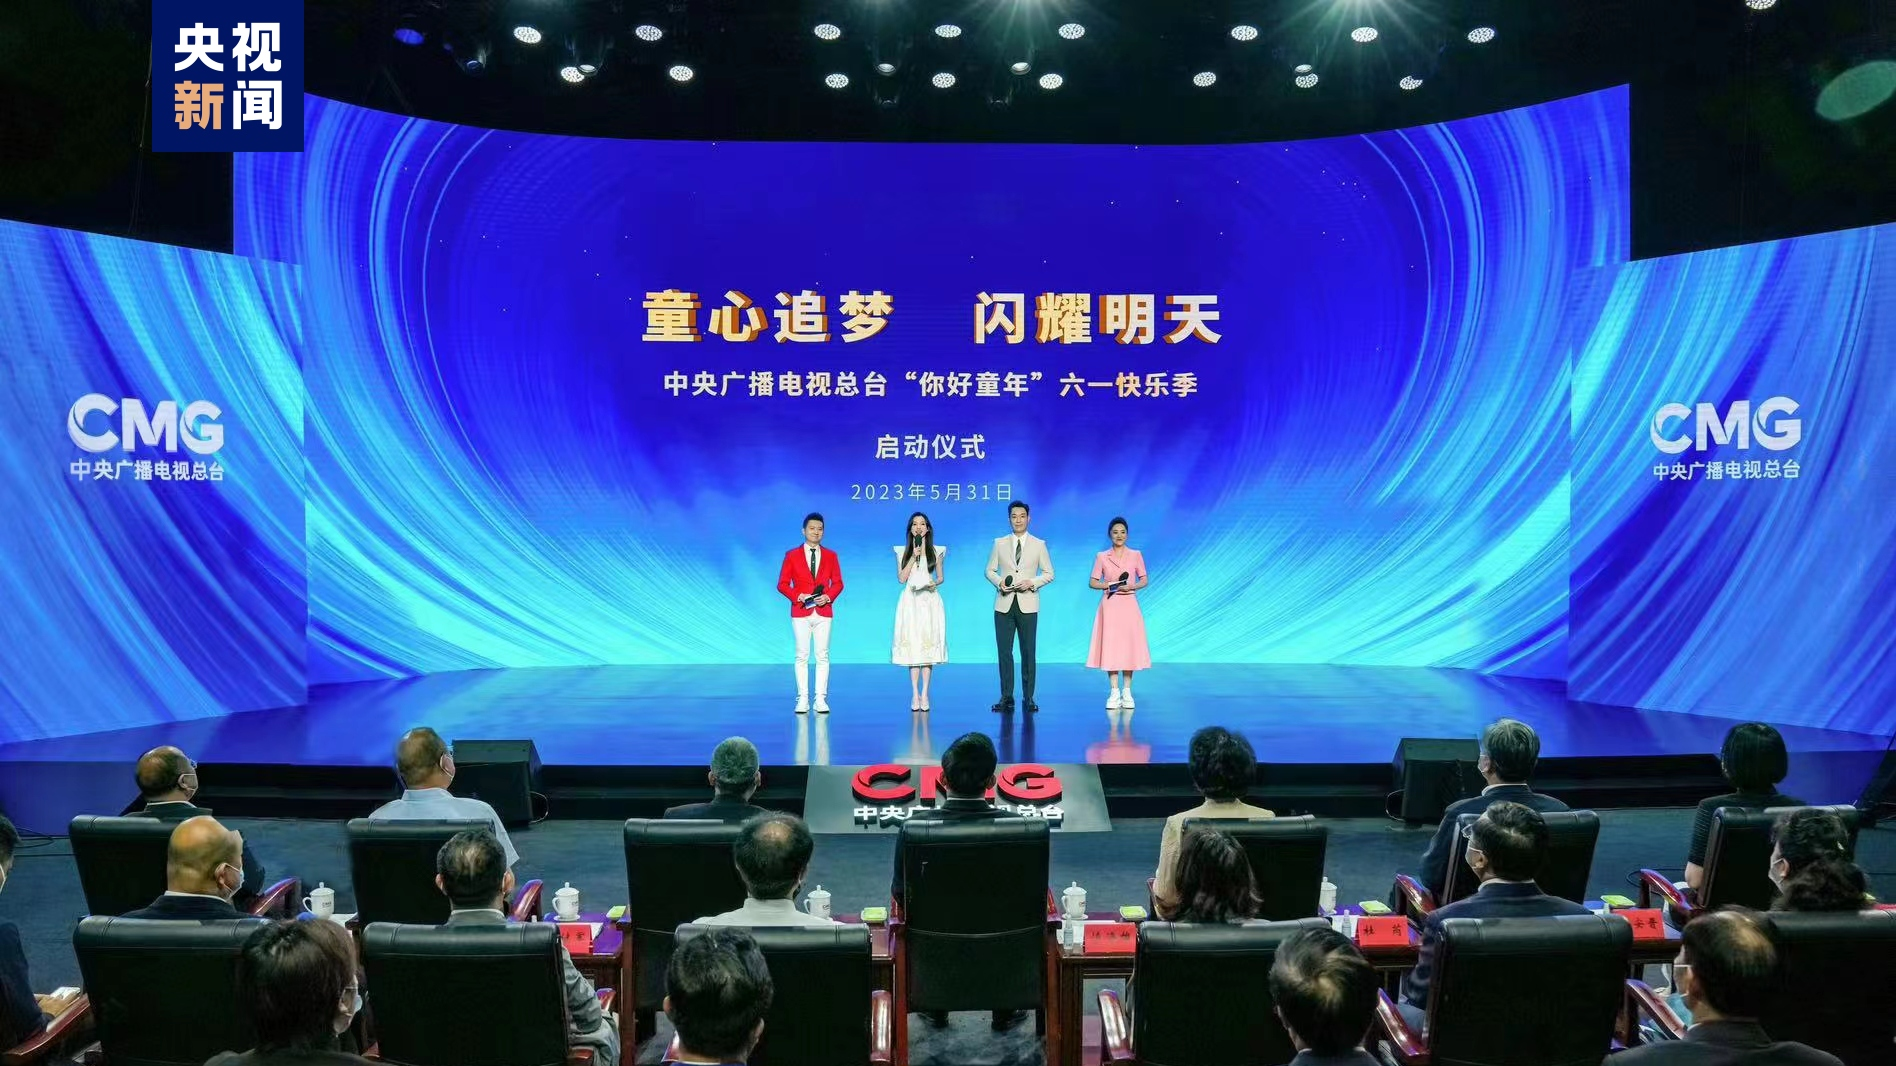 The launching ceremony of TV specials for International Children's Day in Beijing, May 31, 2023. /CMG